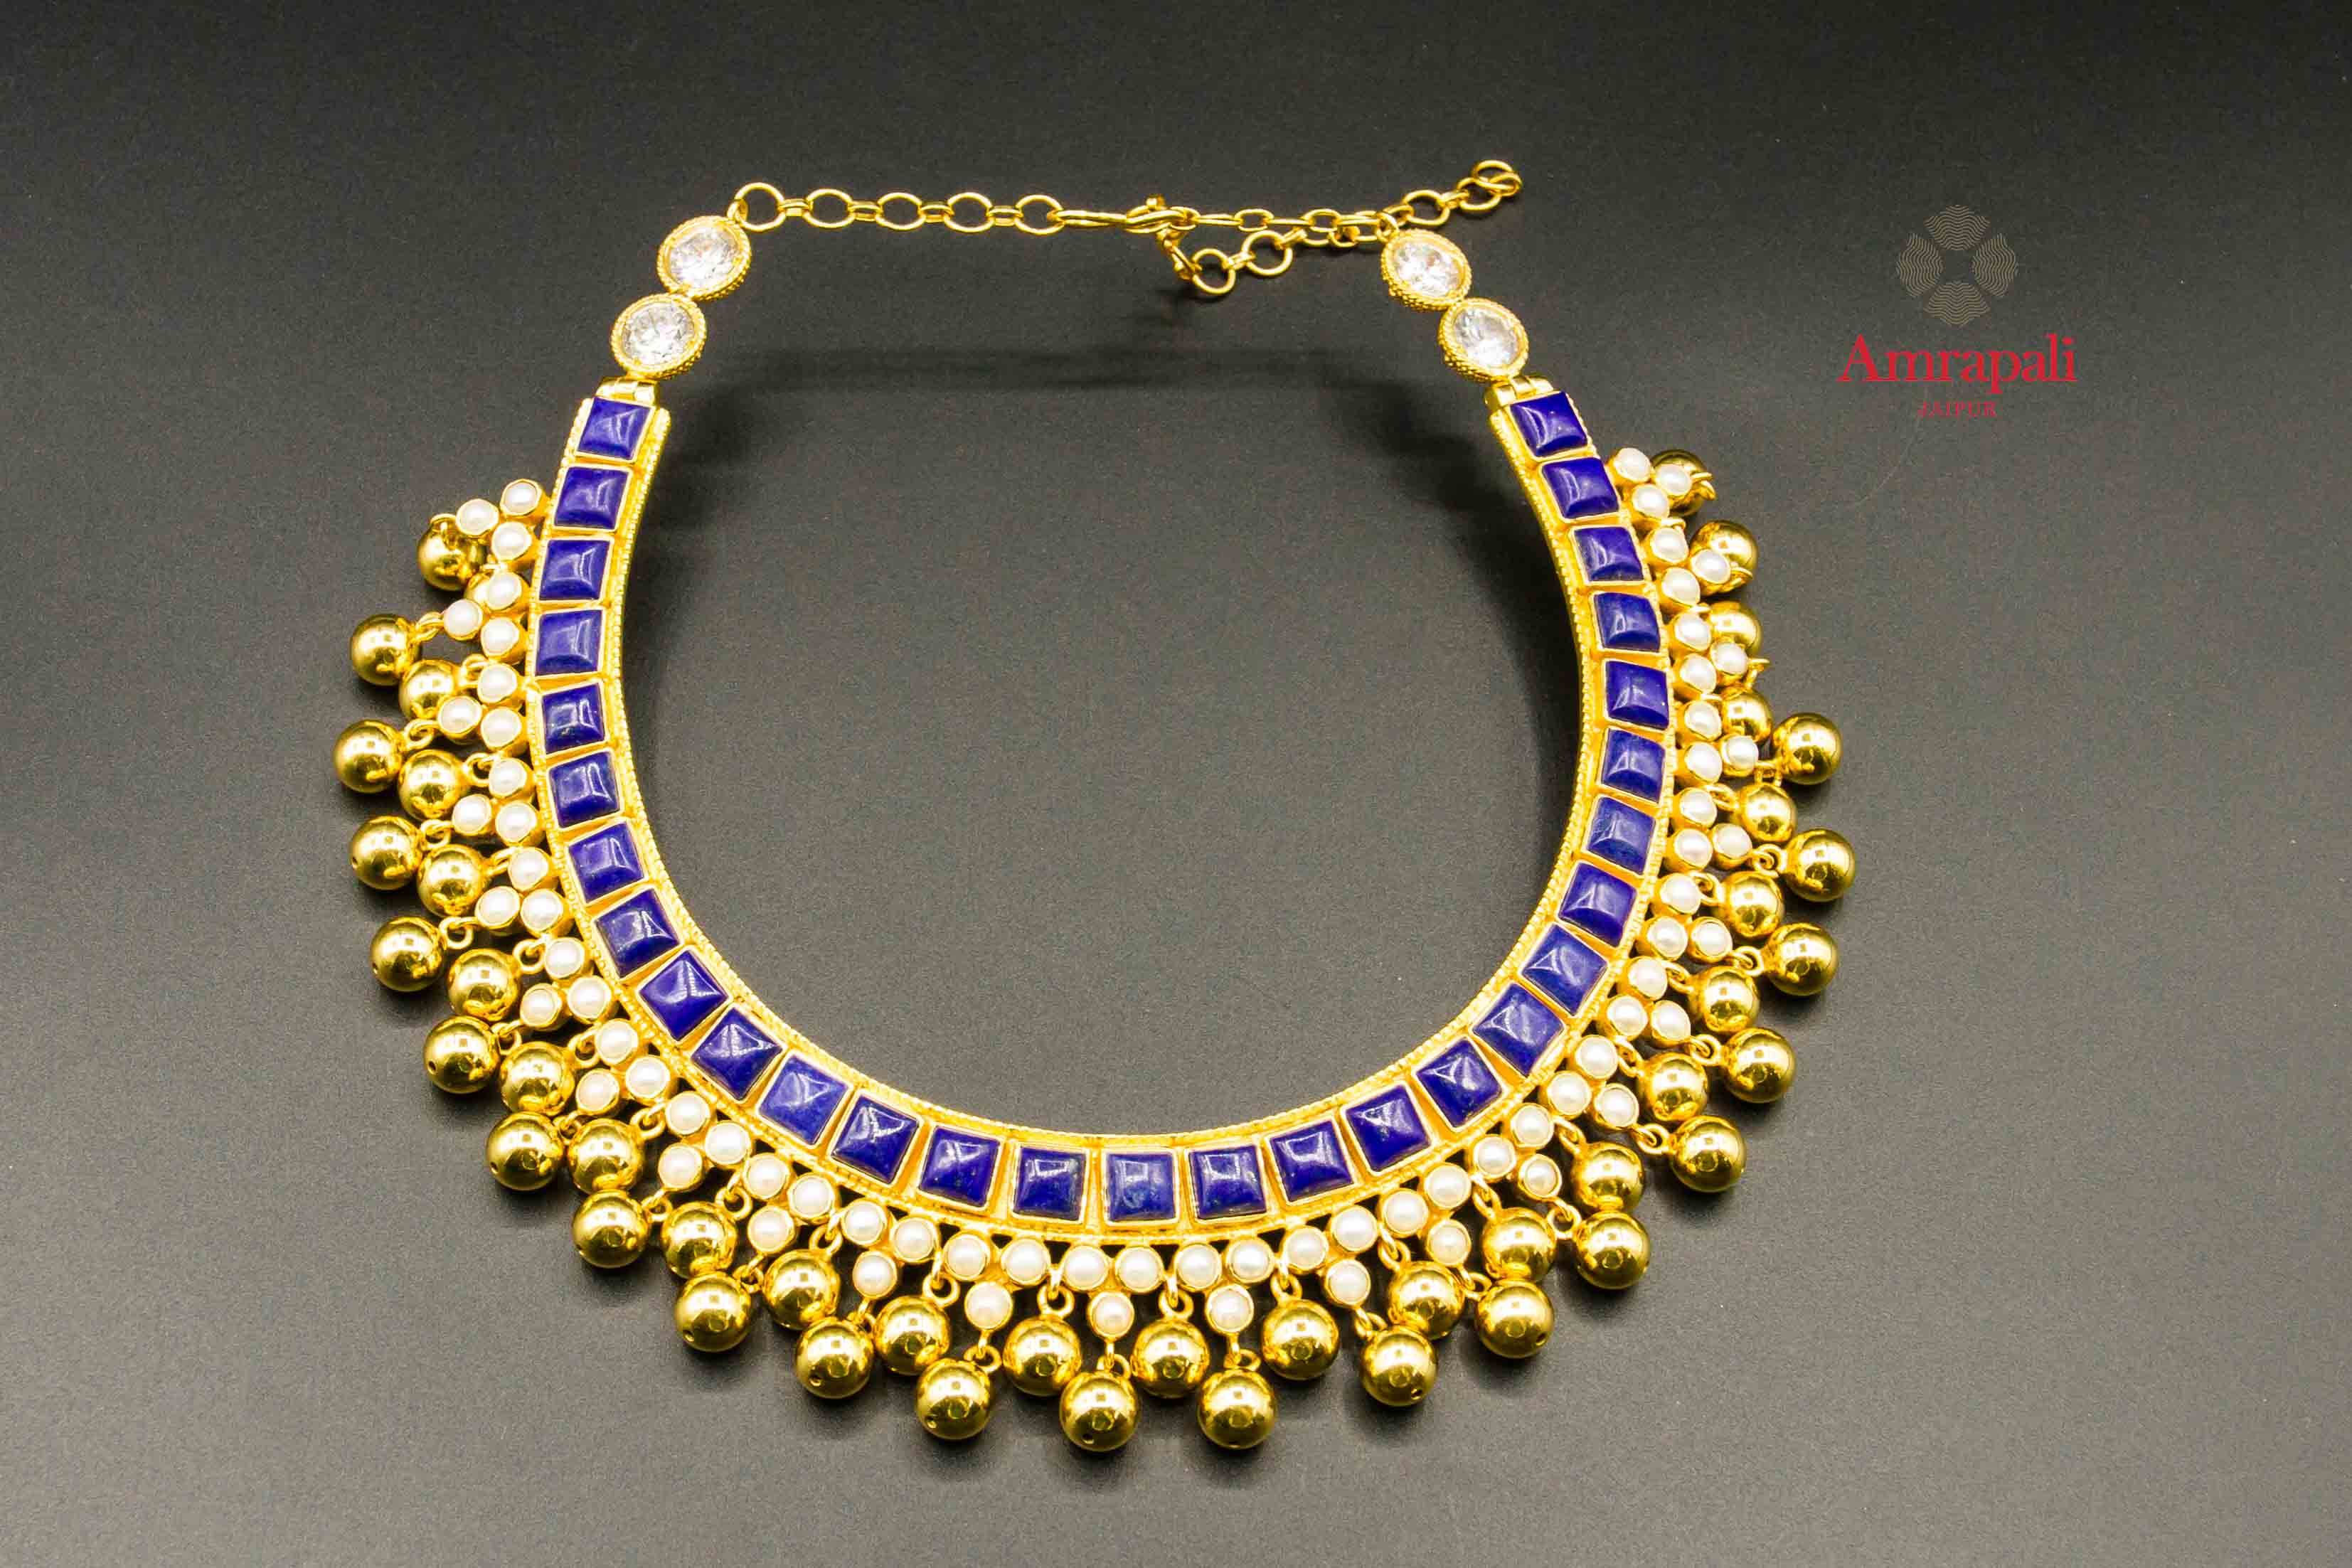 Buy Amrapali silver gold plated pearl and golden beads necklace online in USA with blue stones. Raise your traditional fashion quotient on special occasions with exquisite Indian jewelry from Pure Elegance Indian clothing store in USA. Enhance your look with silver gold plated jewelry, fashion jewelry available online.-flatlay